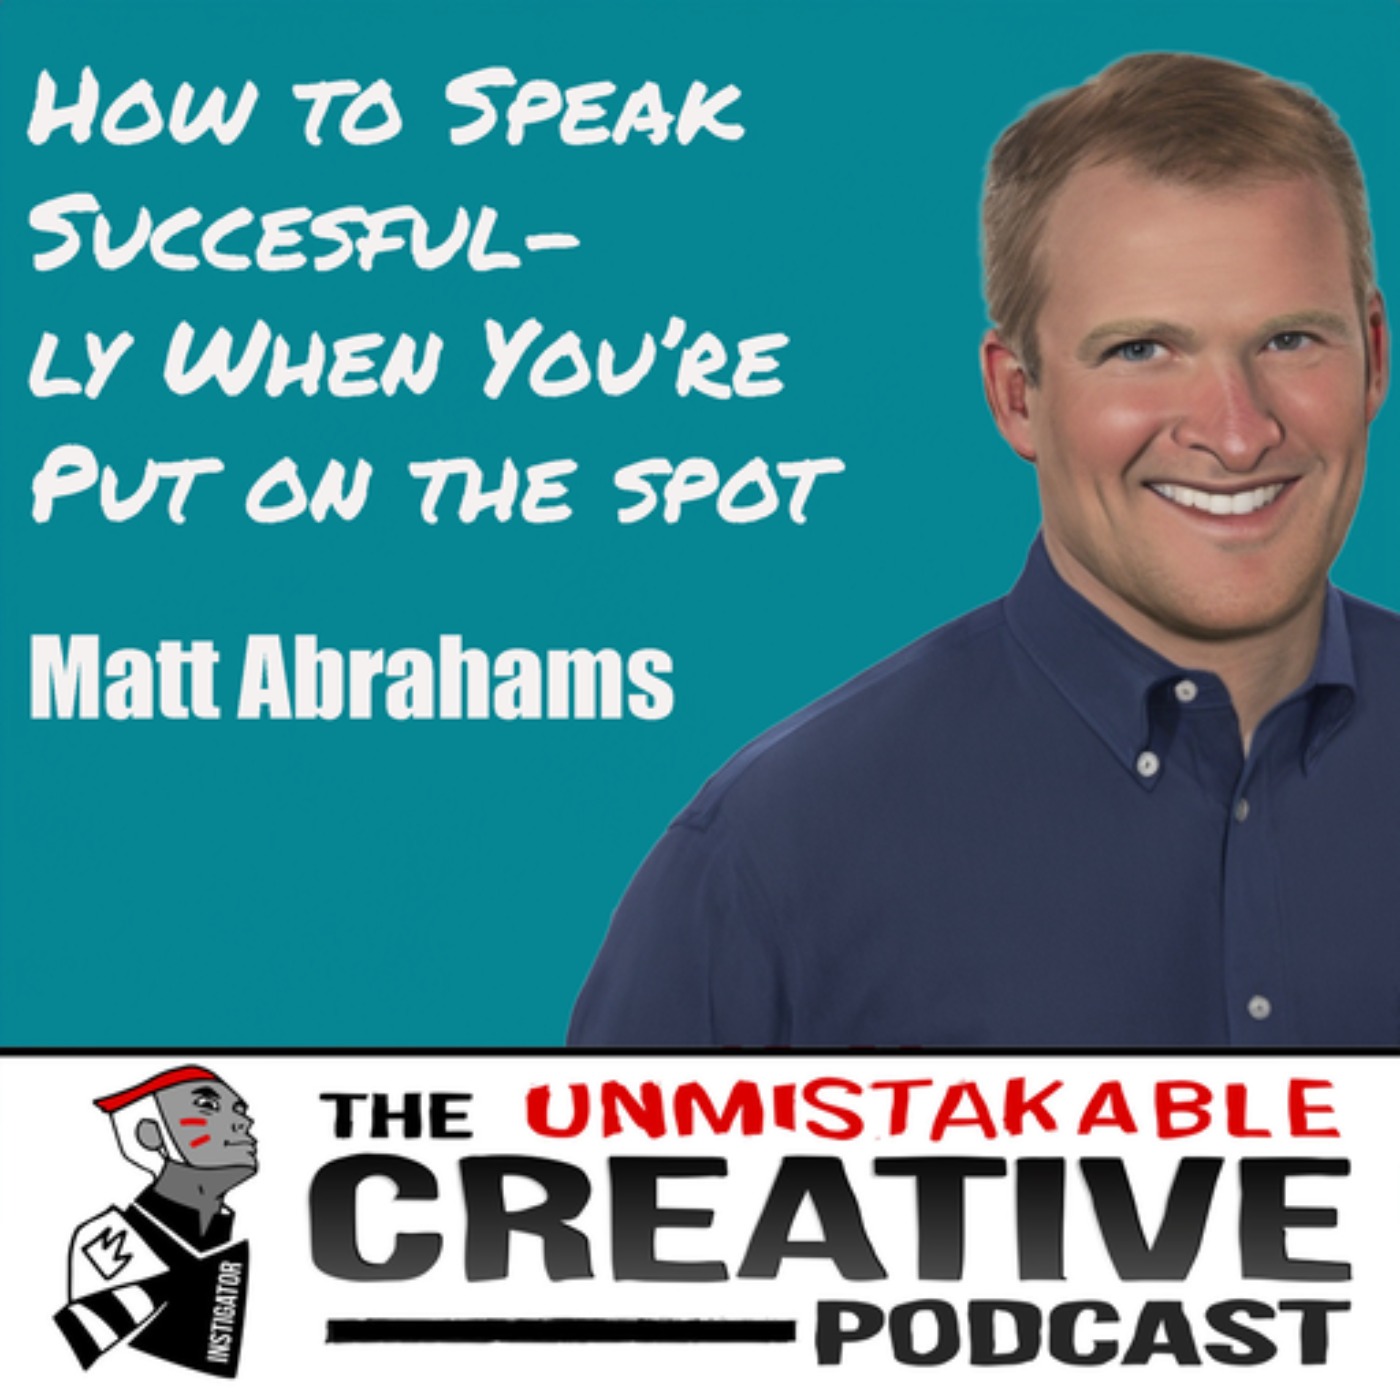 Matt Abrahams | How to Speak Successfully When You're Put on the Spot